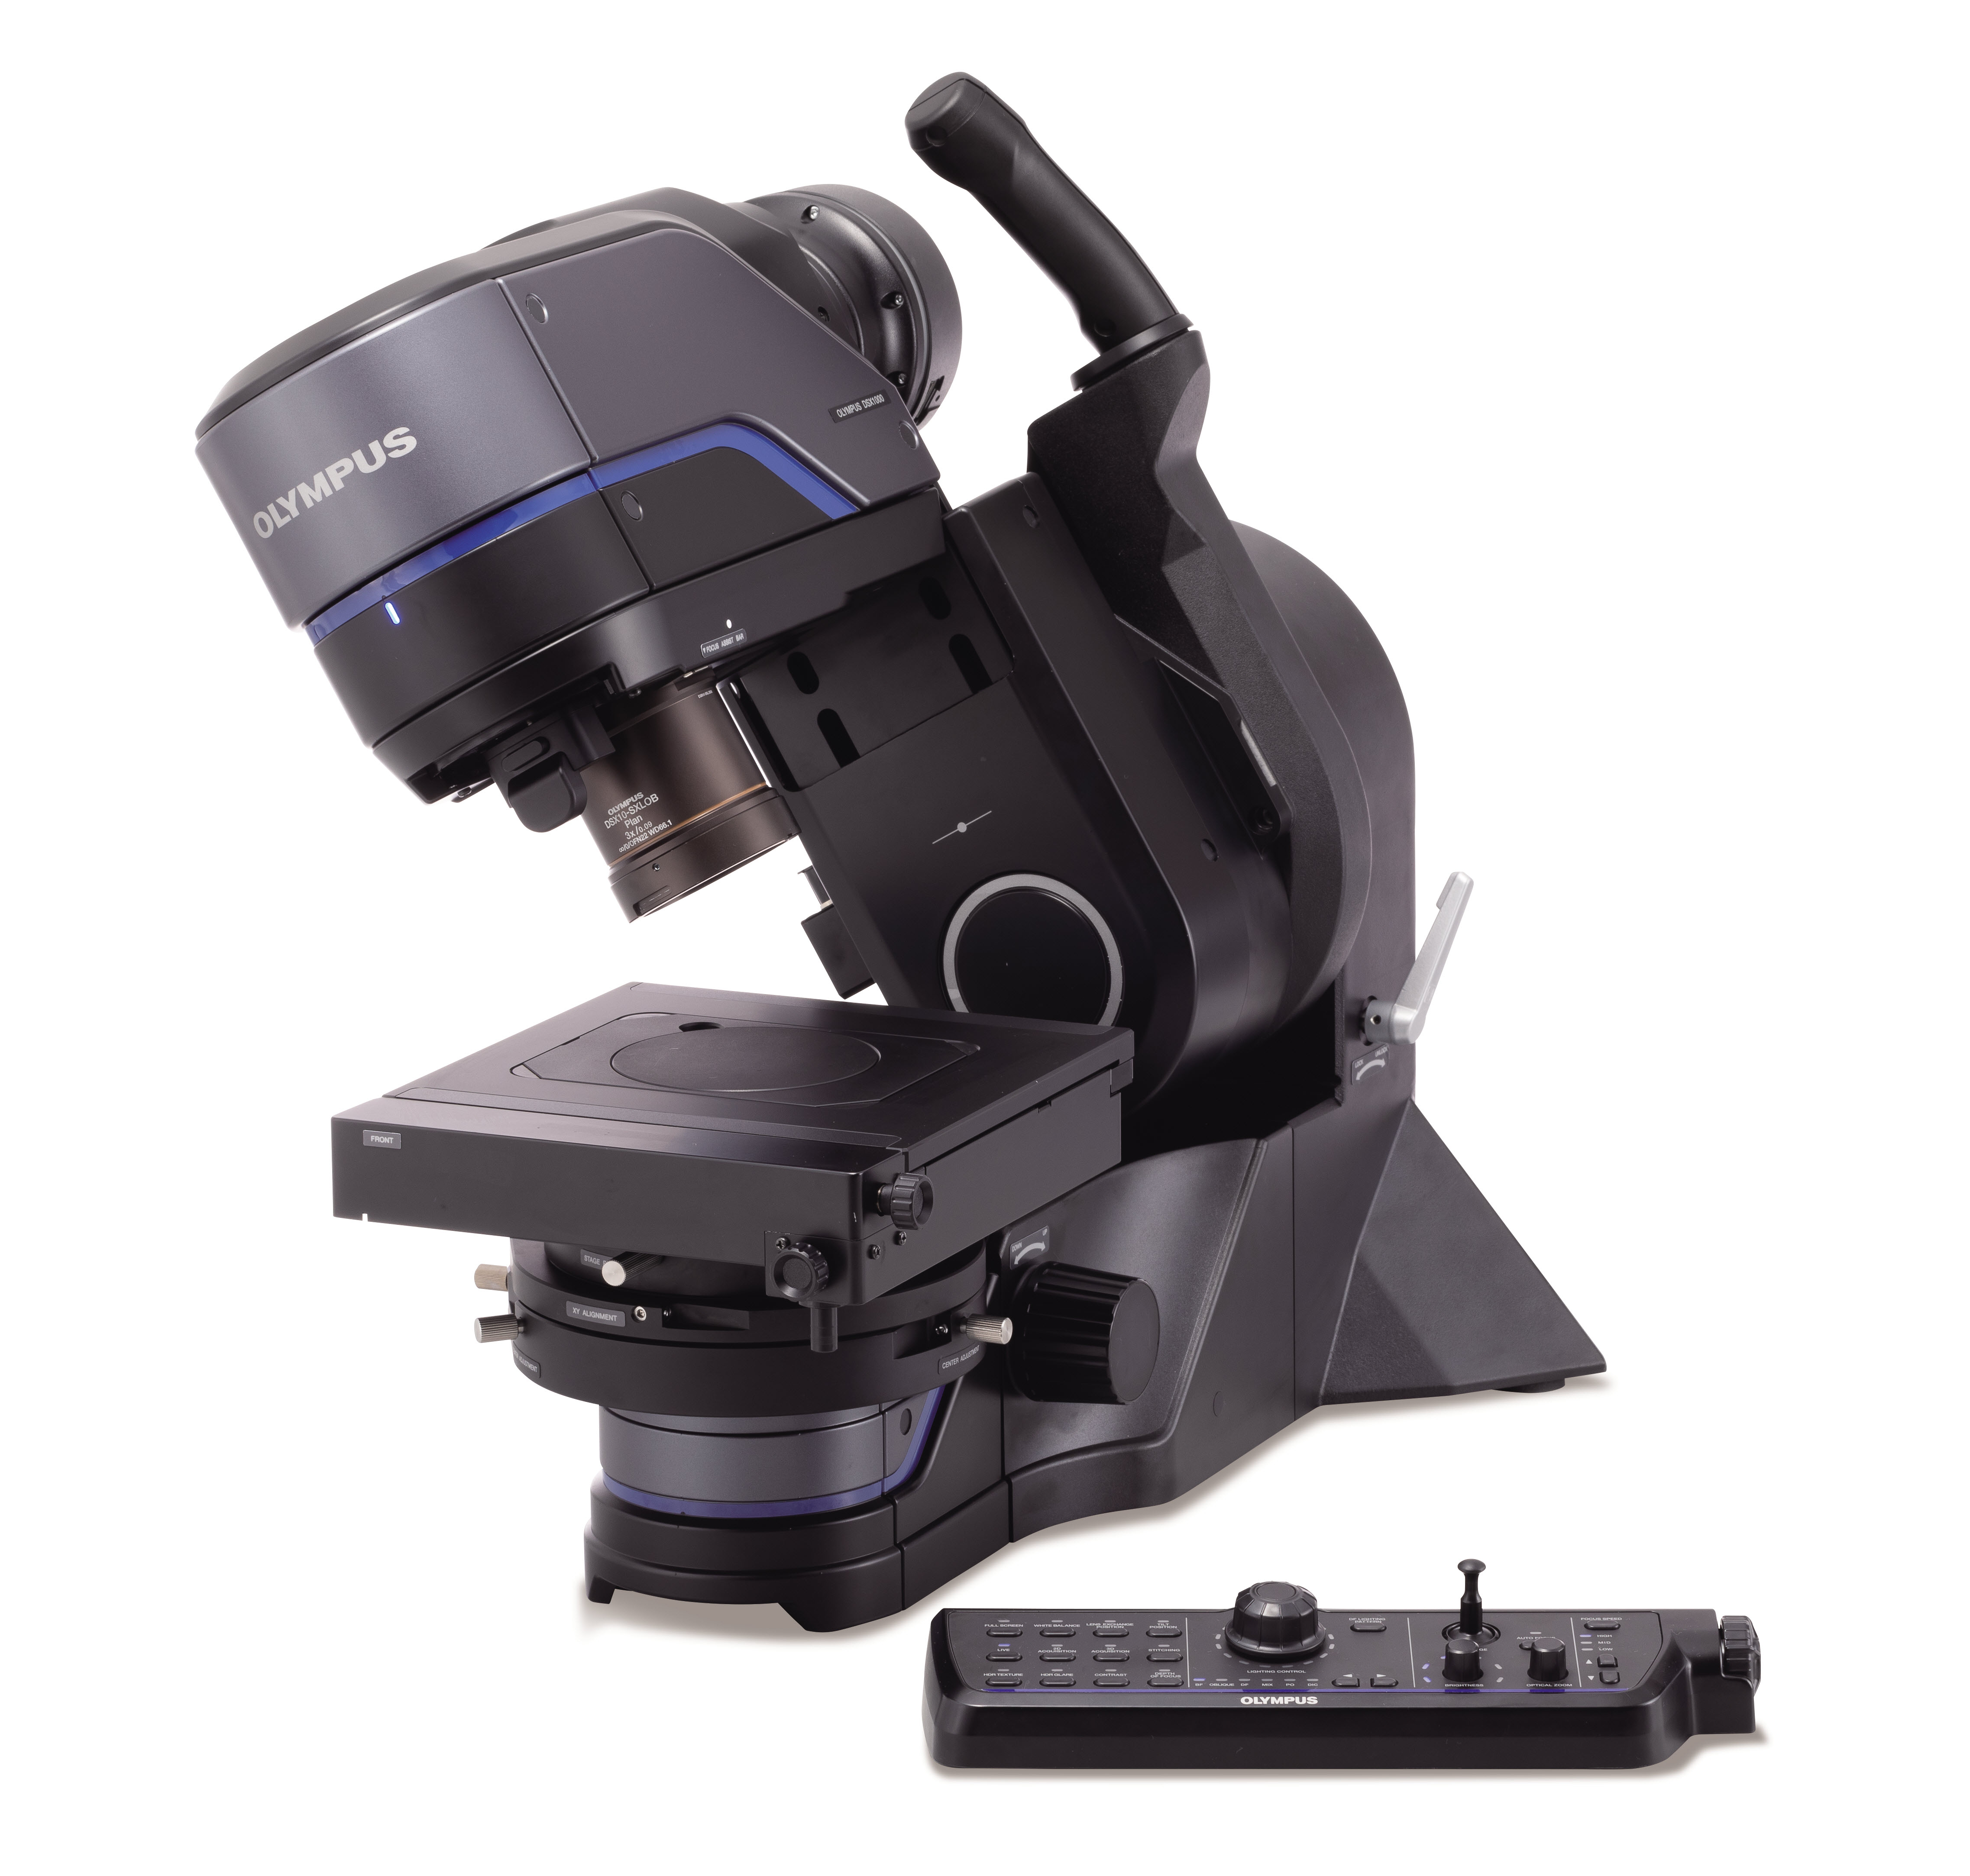 Olympus DSX1000 digital microscope tilt model with remote control console